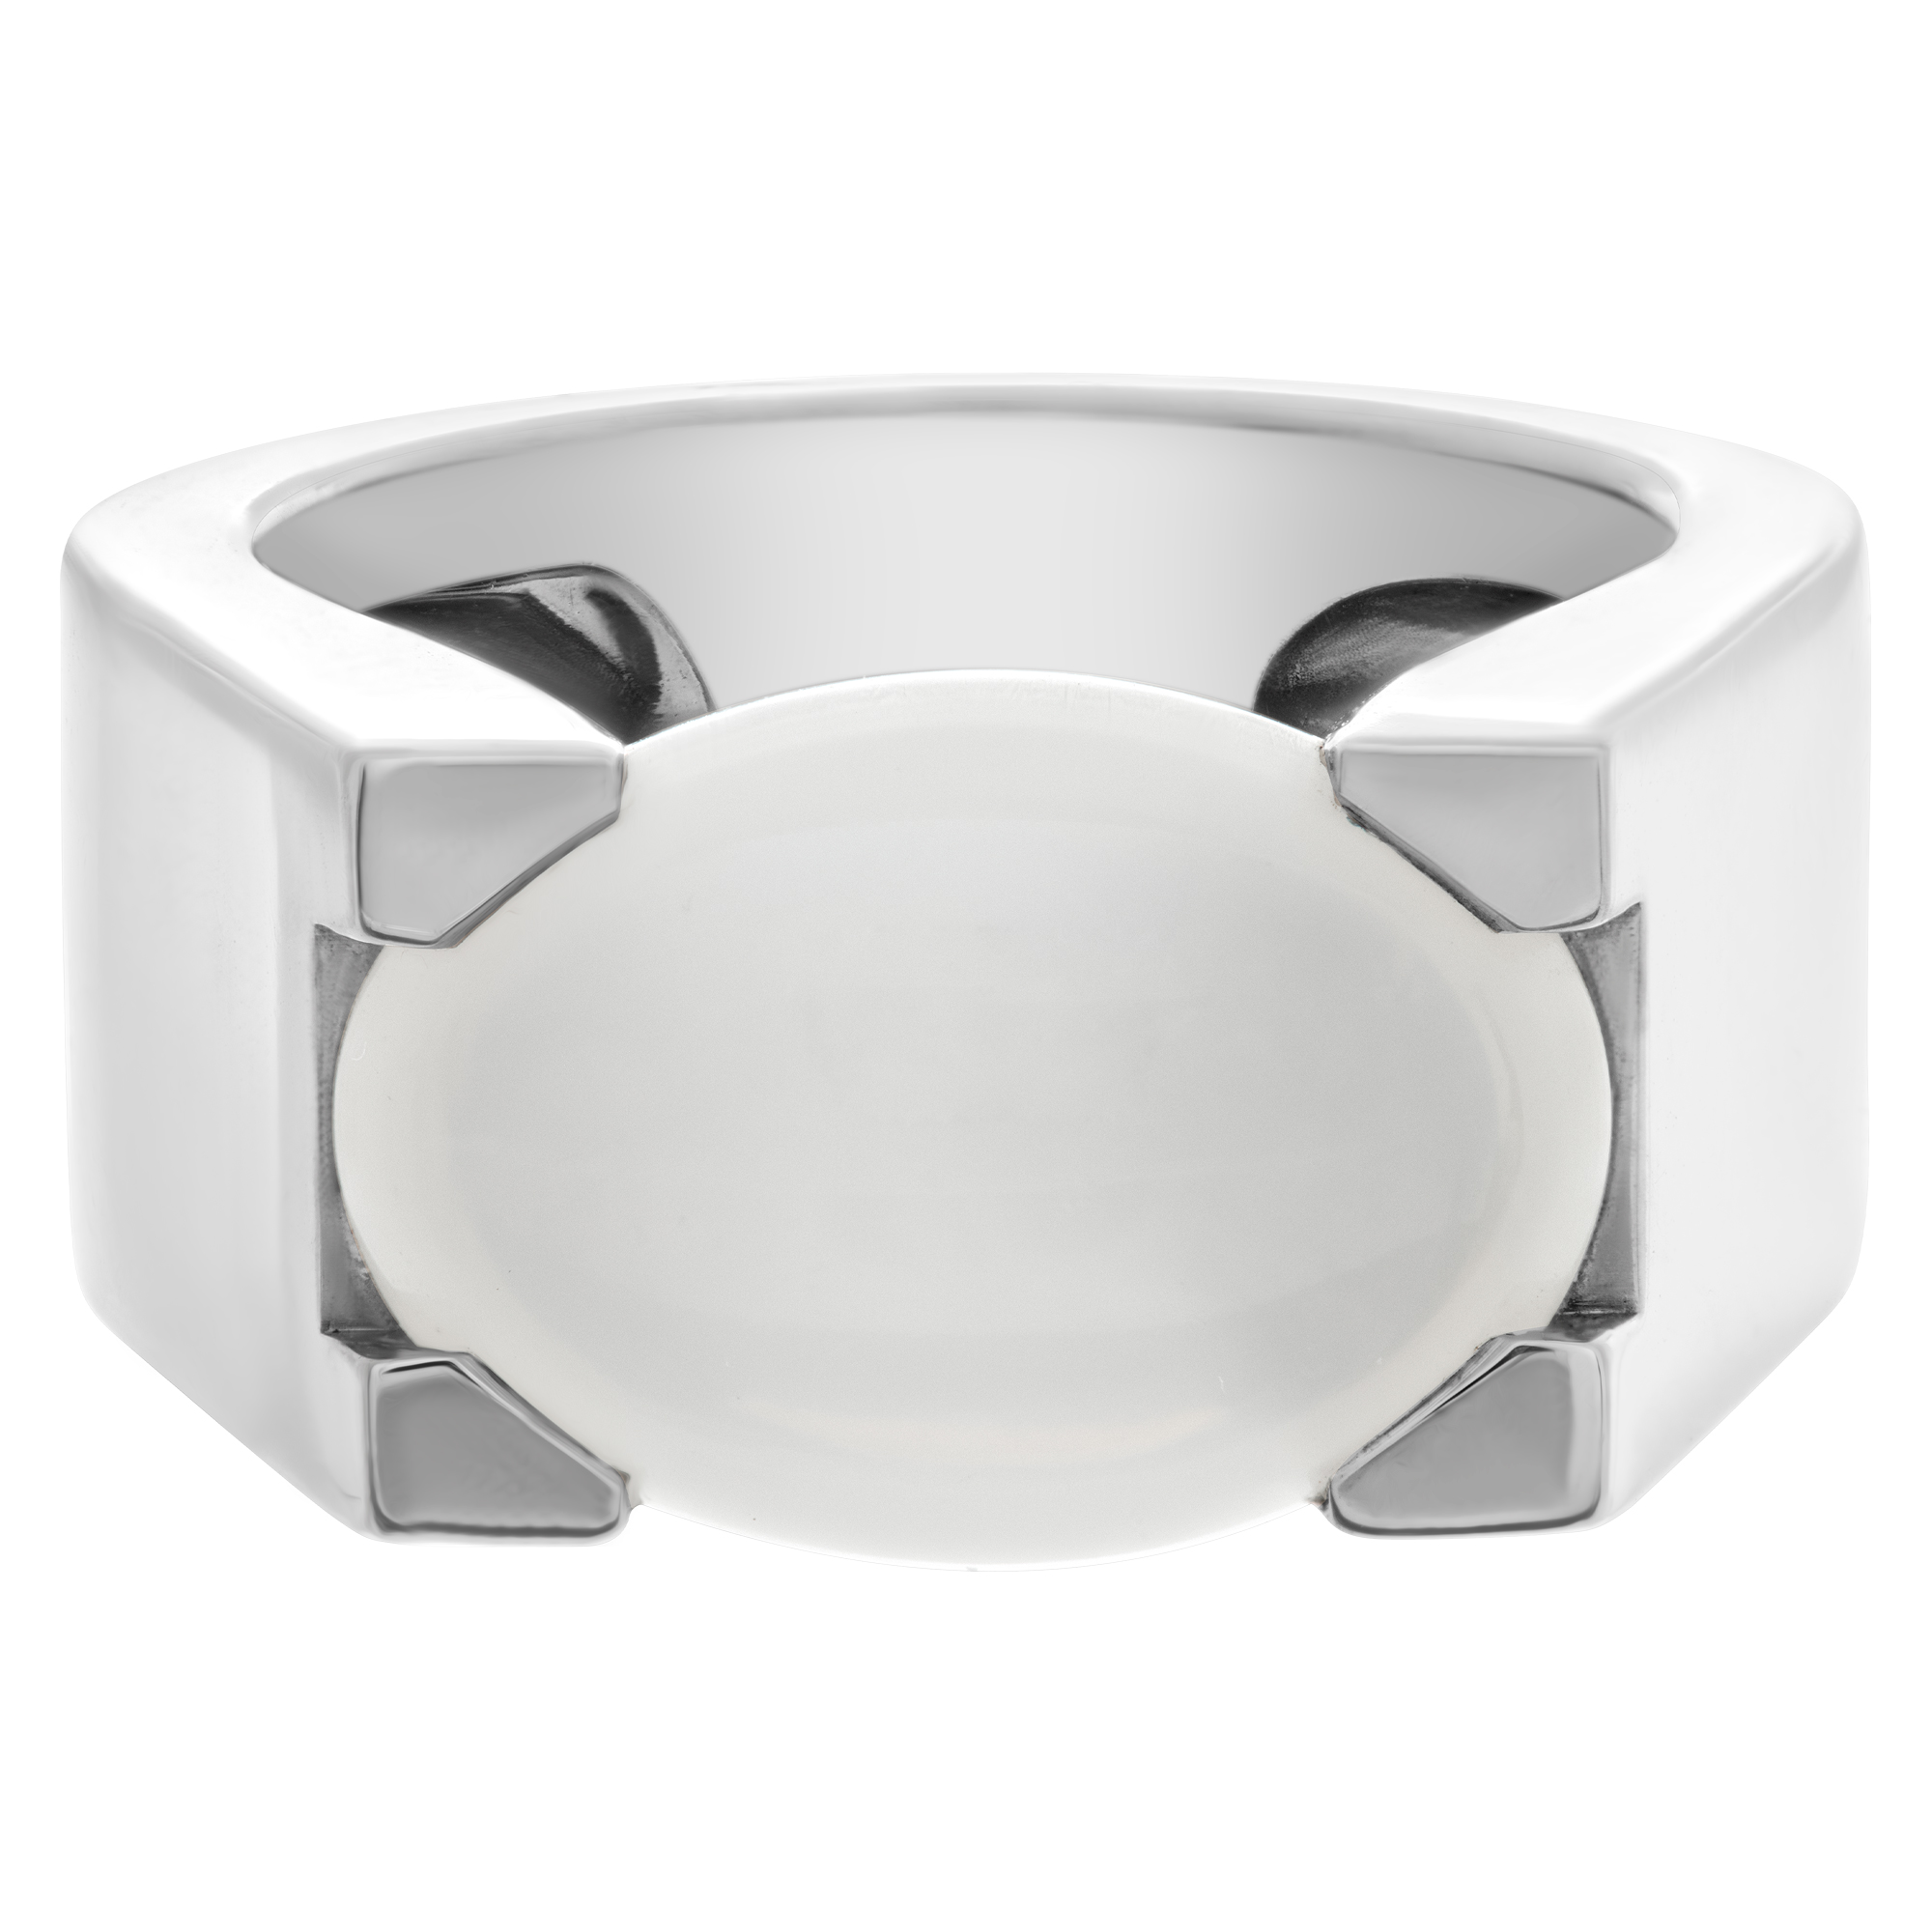 Cartier cabochon moonstone ring in 18k white gold. image 2